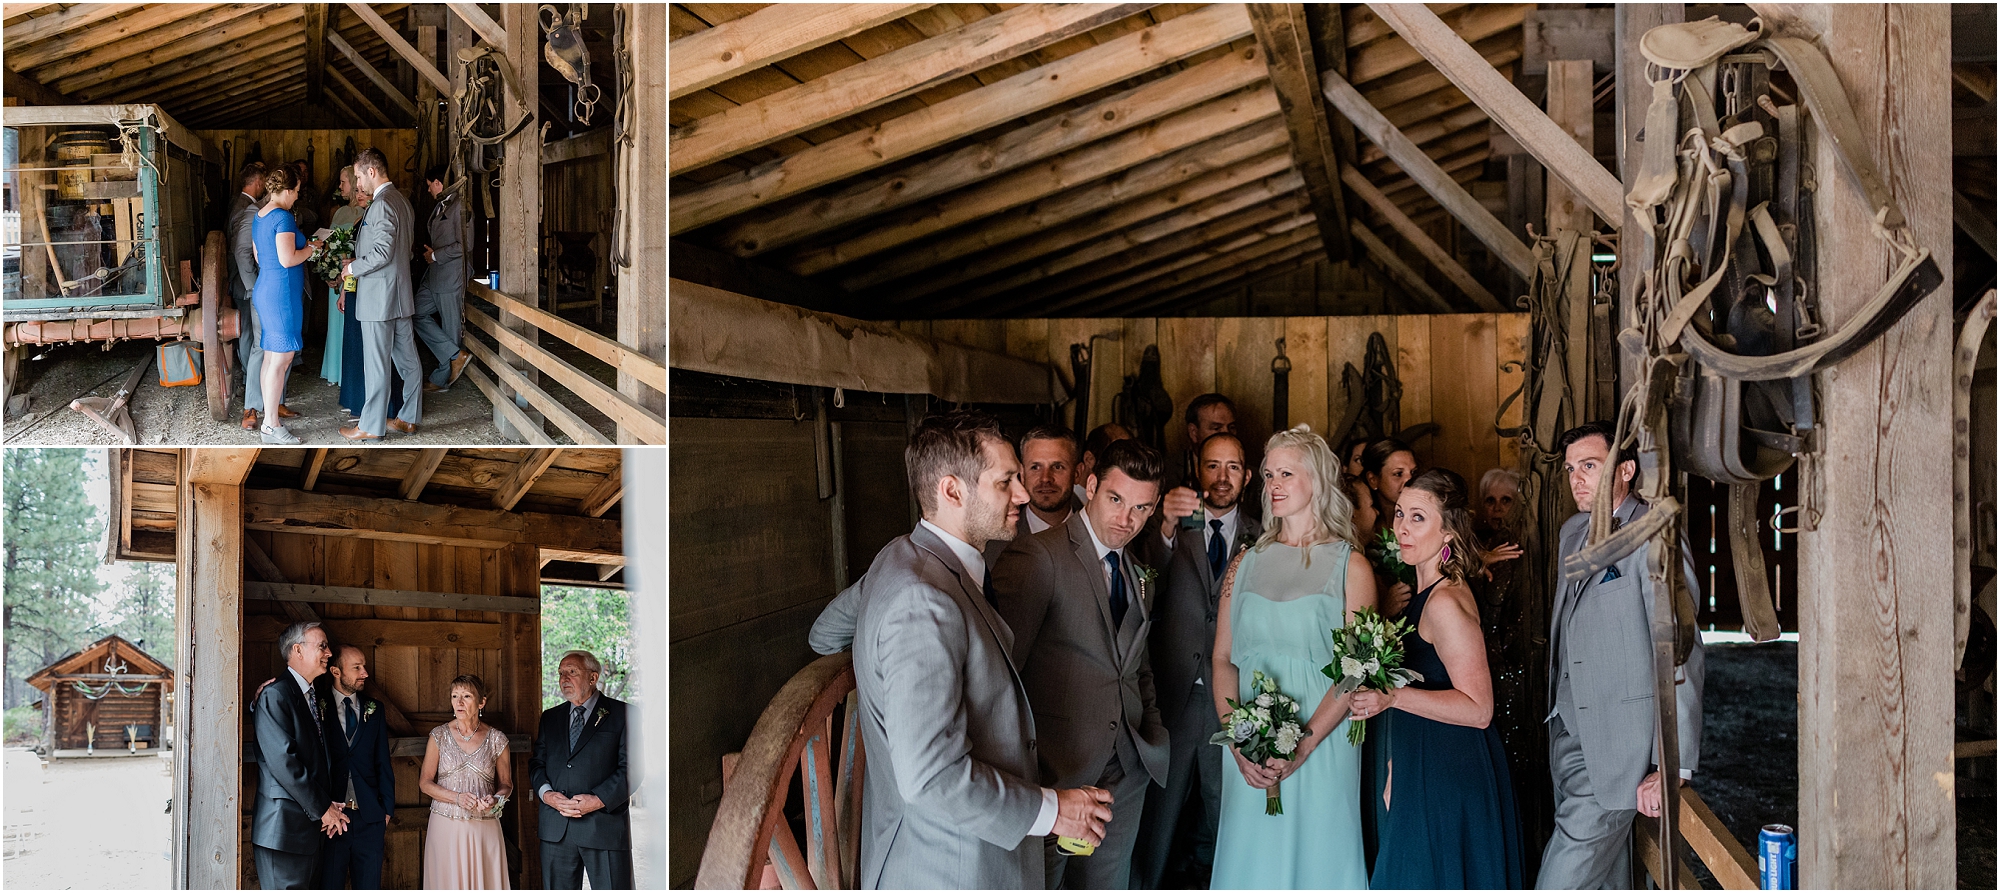 The wedding party is all hidden away inside the rustic horse stables of the Miller Family Ranch at the High Desert Museum in Bend, OR before the ceremony begins. | Erica Swantek Photography